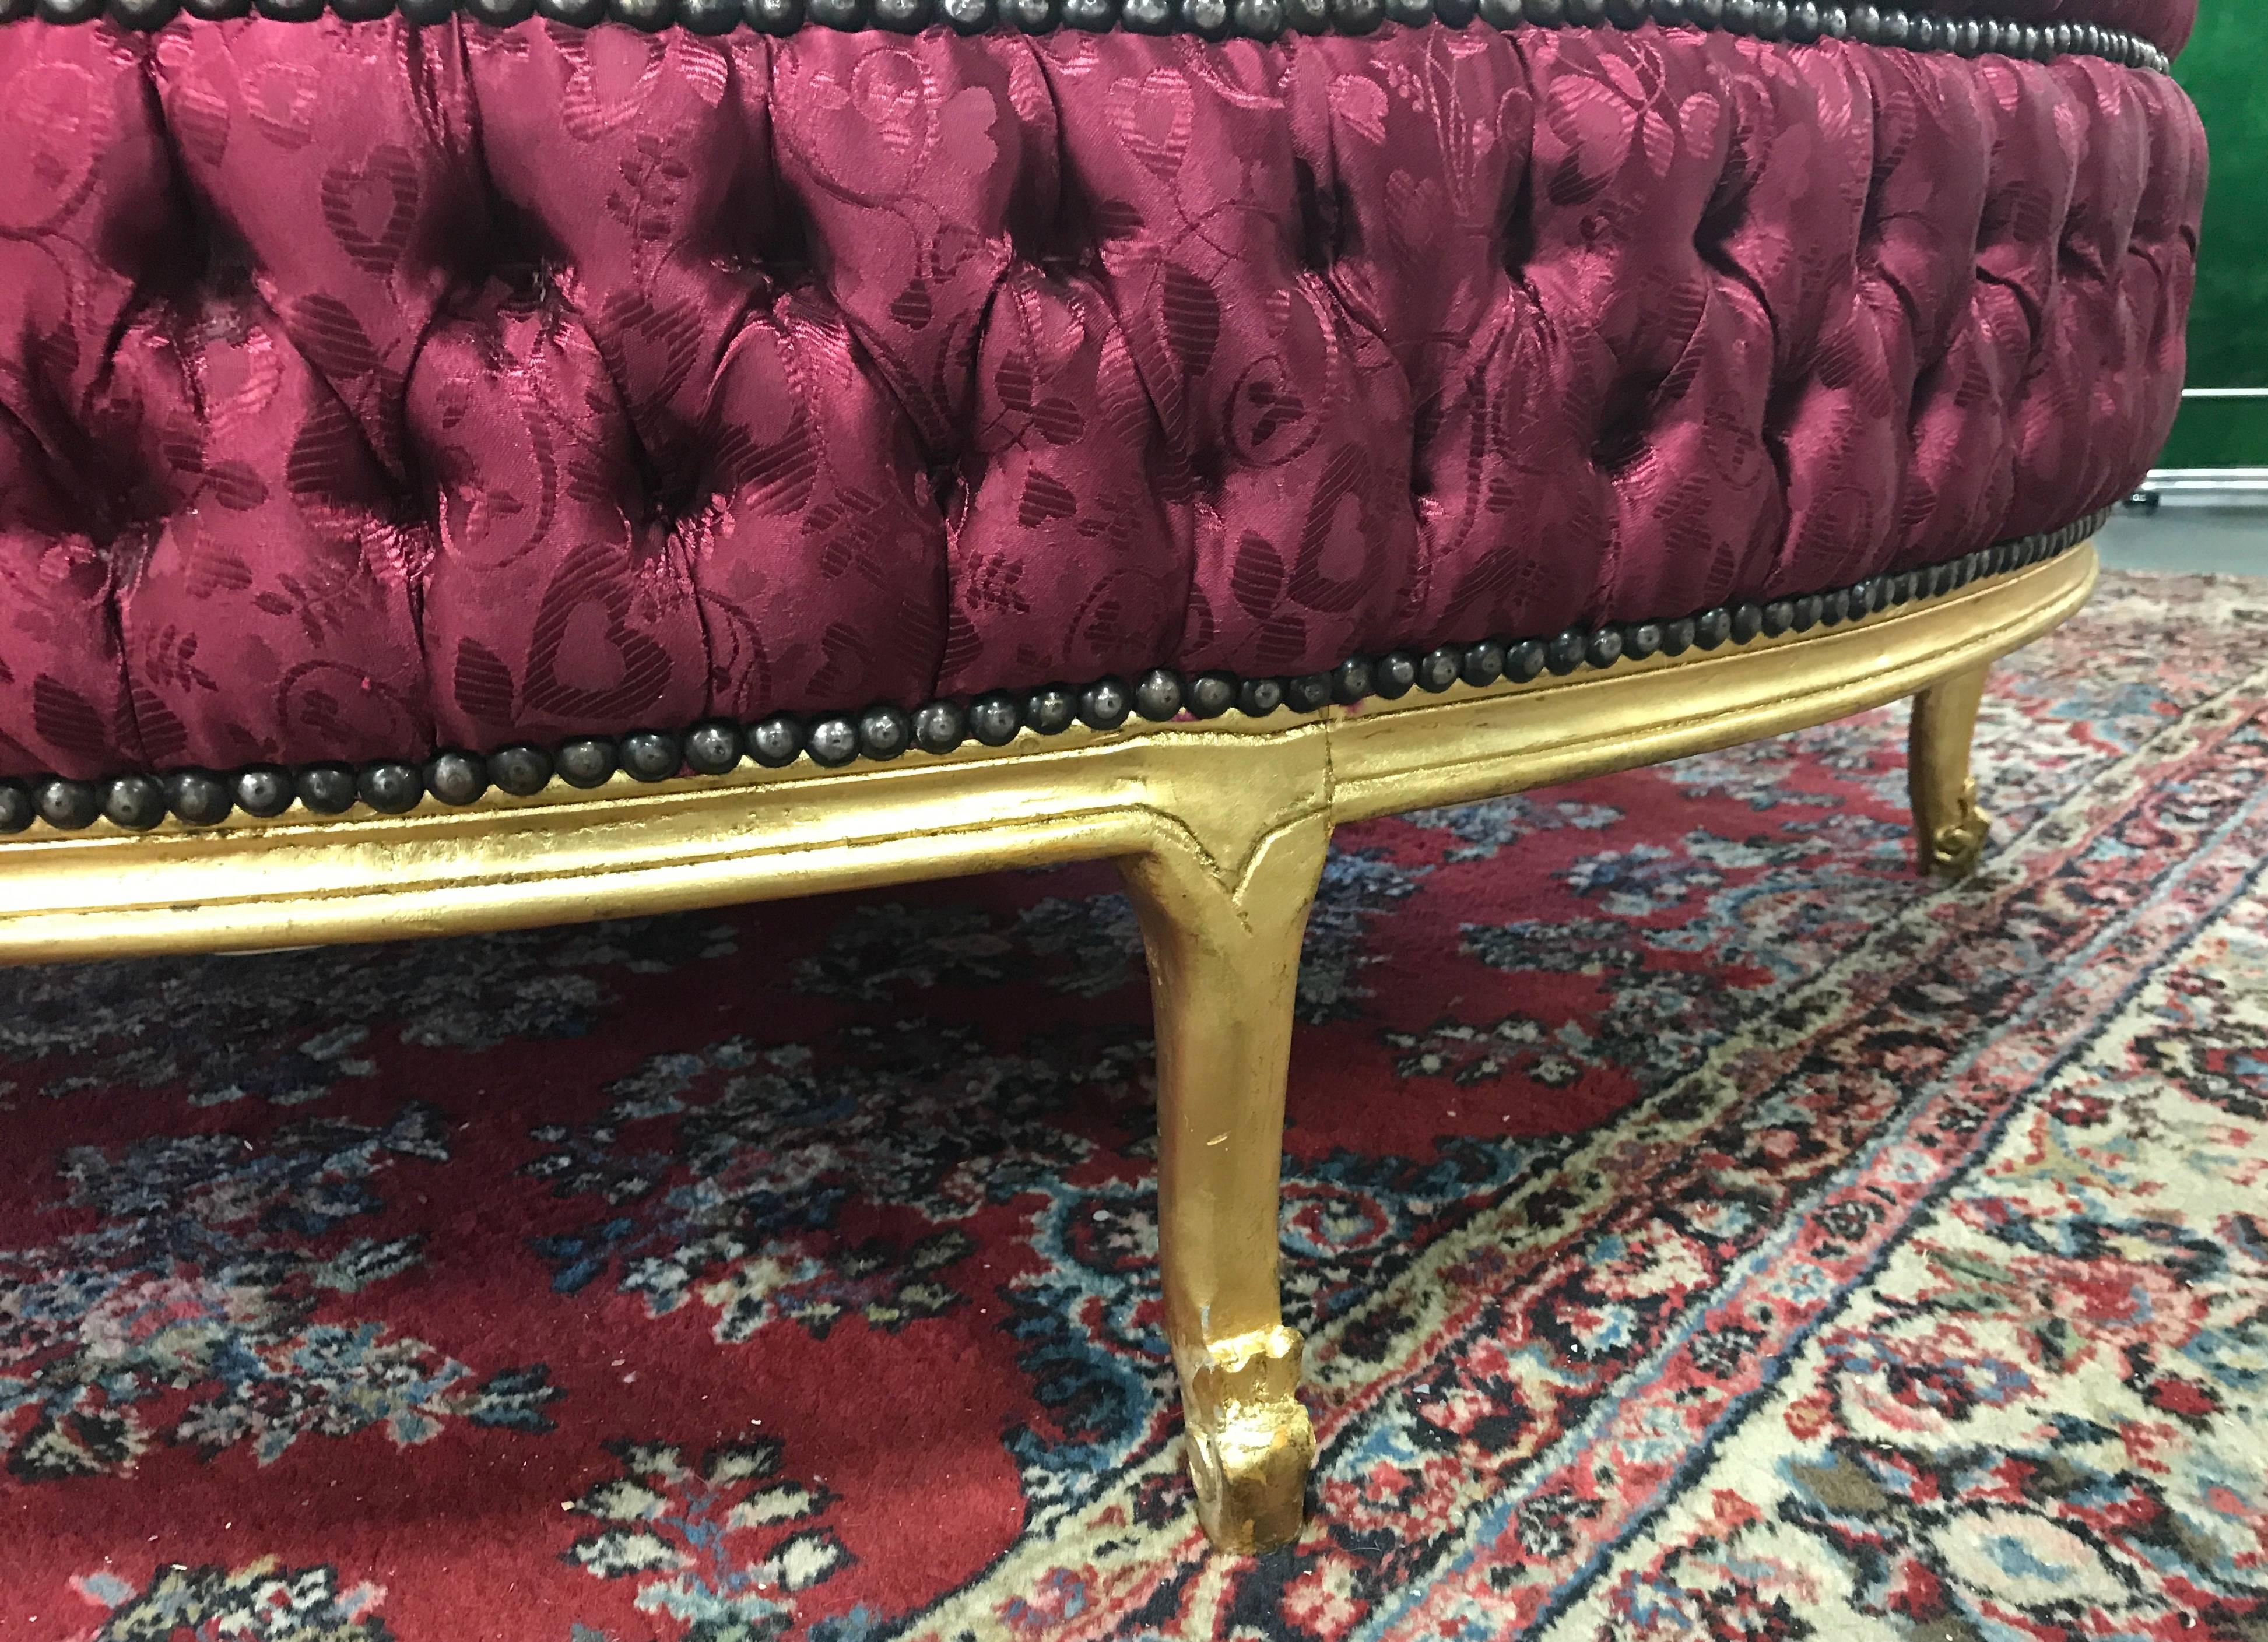 Five feet round Louis XIV style tufted ottoman. Has a wooden, gold painted base.